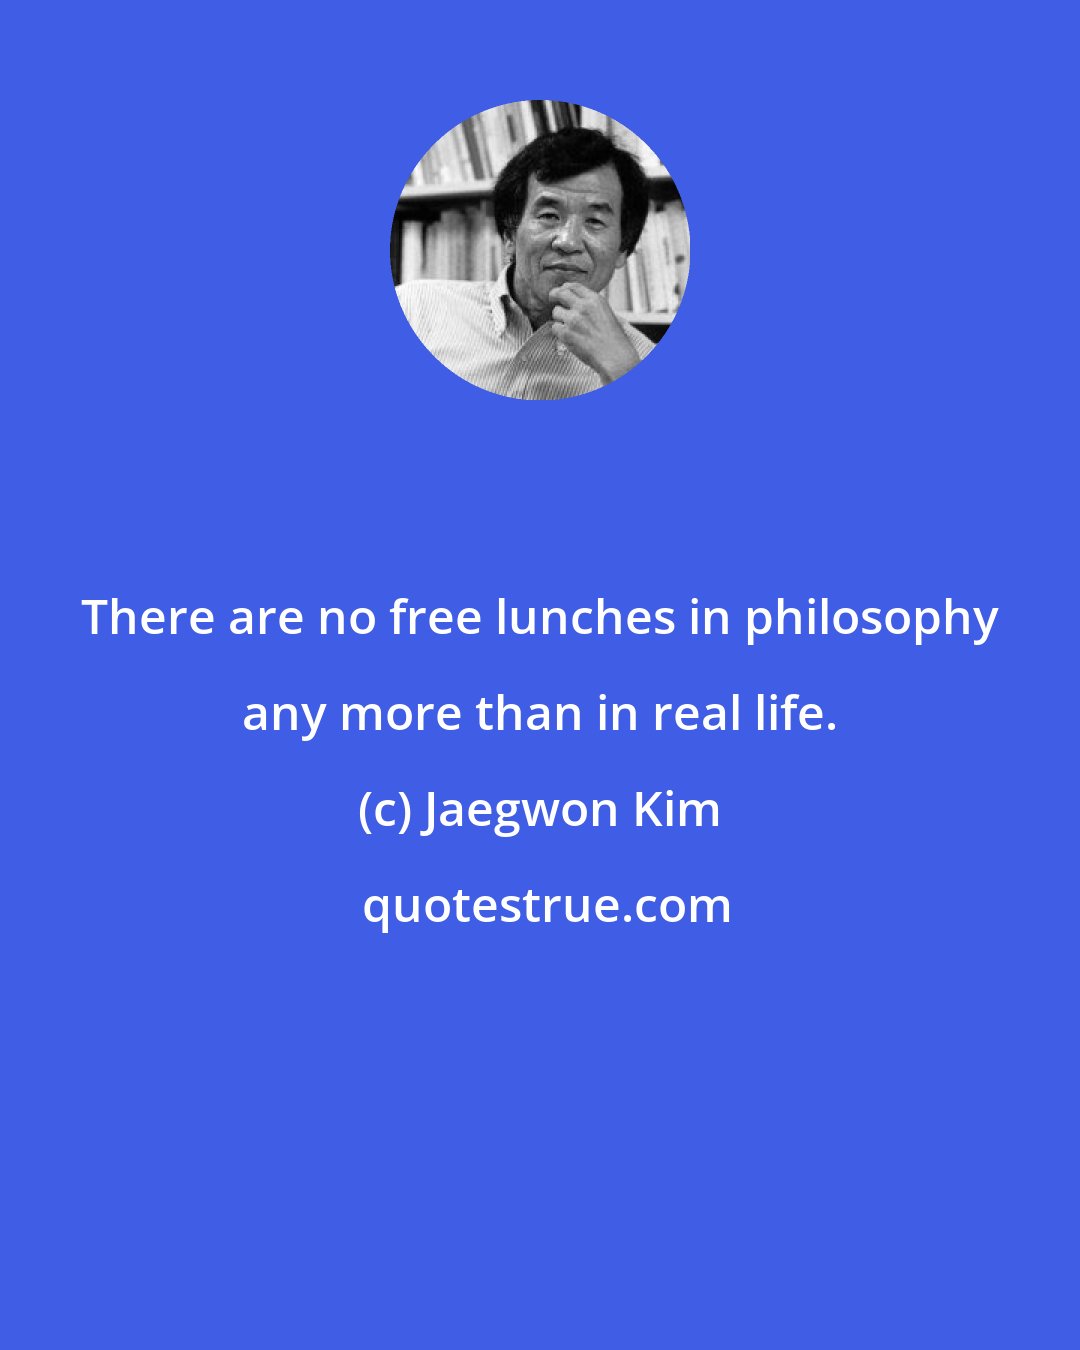 Jaegwon Kim: There are no free lunches in philosophy any more than in real life.